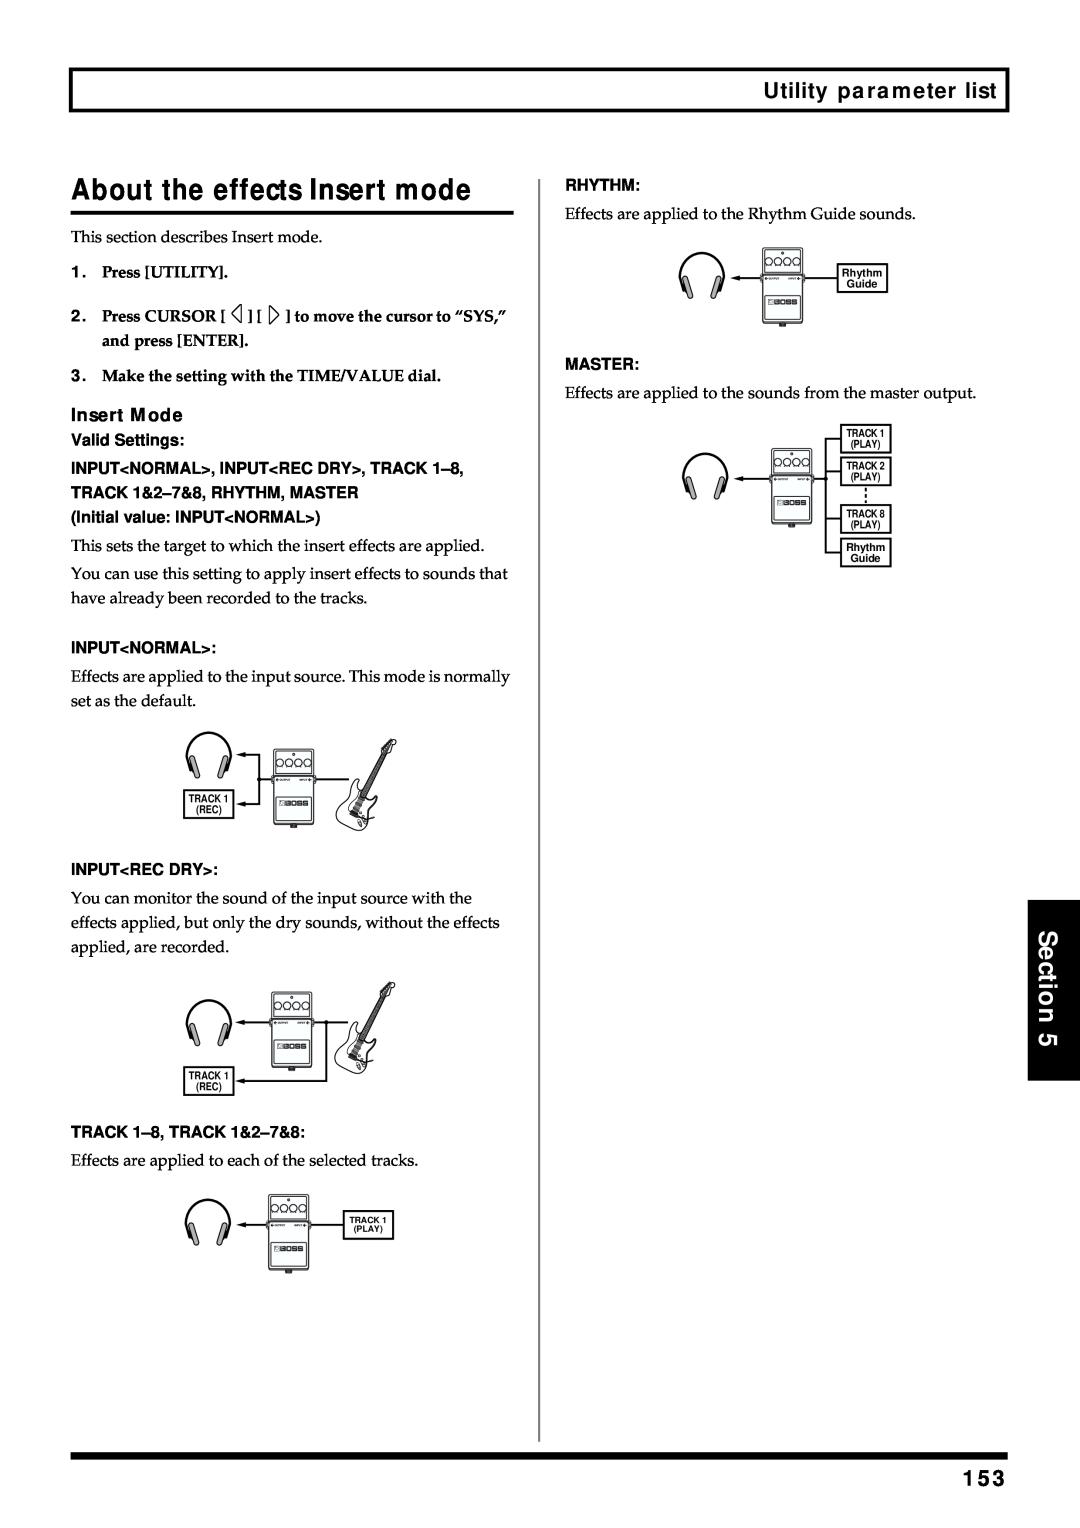 Roland BR-864 owner manual About the effects Insert mode, Section, Utility parameter list 